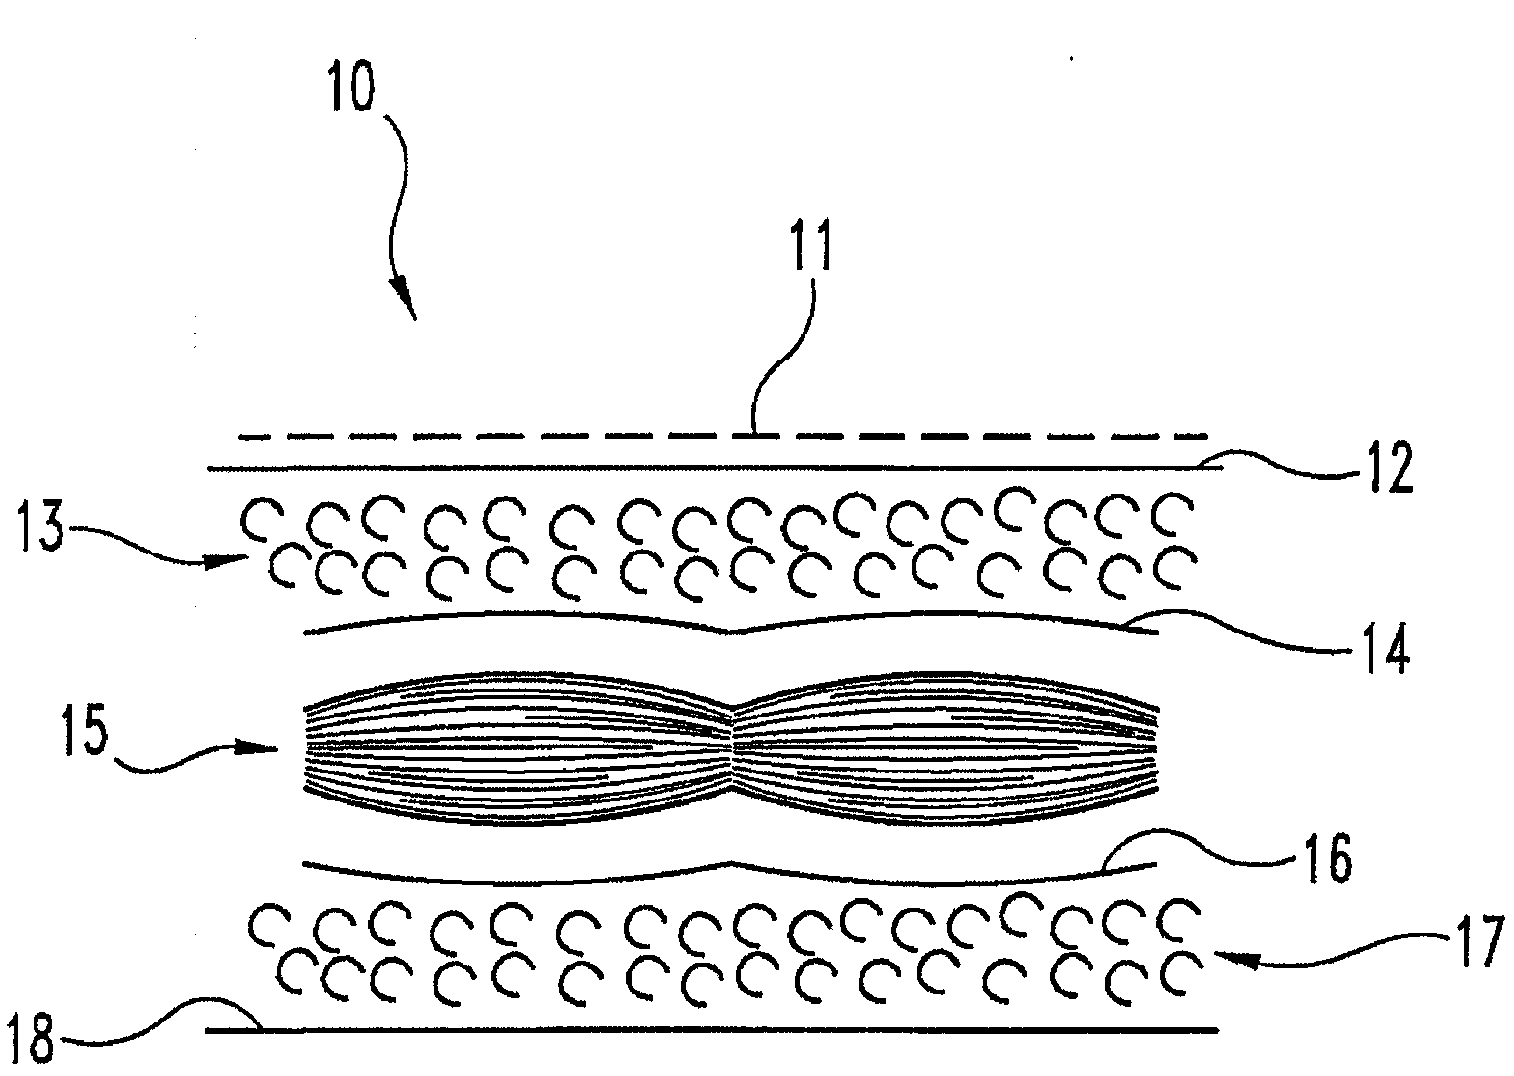 Isolated extracellular matrix material including subserous fascia